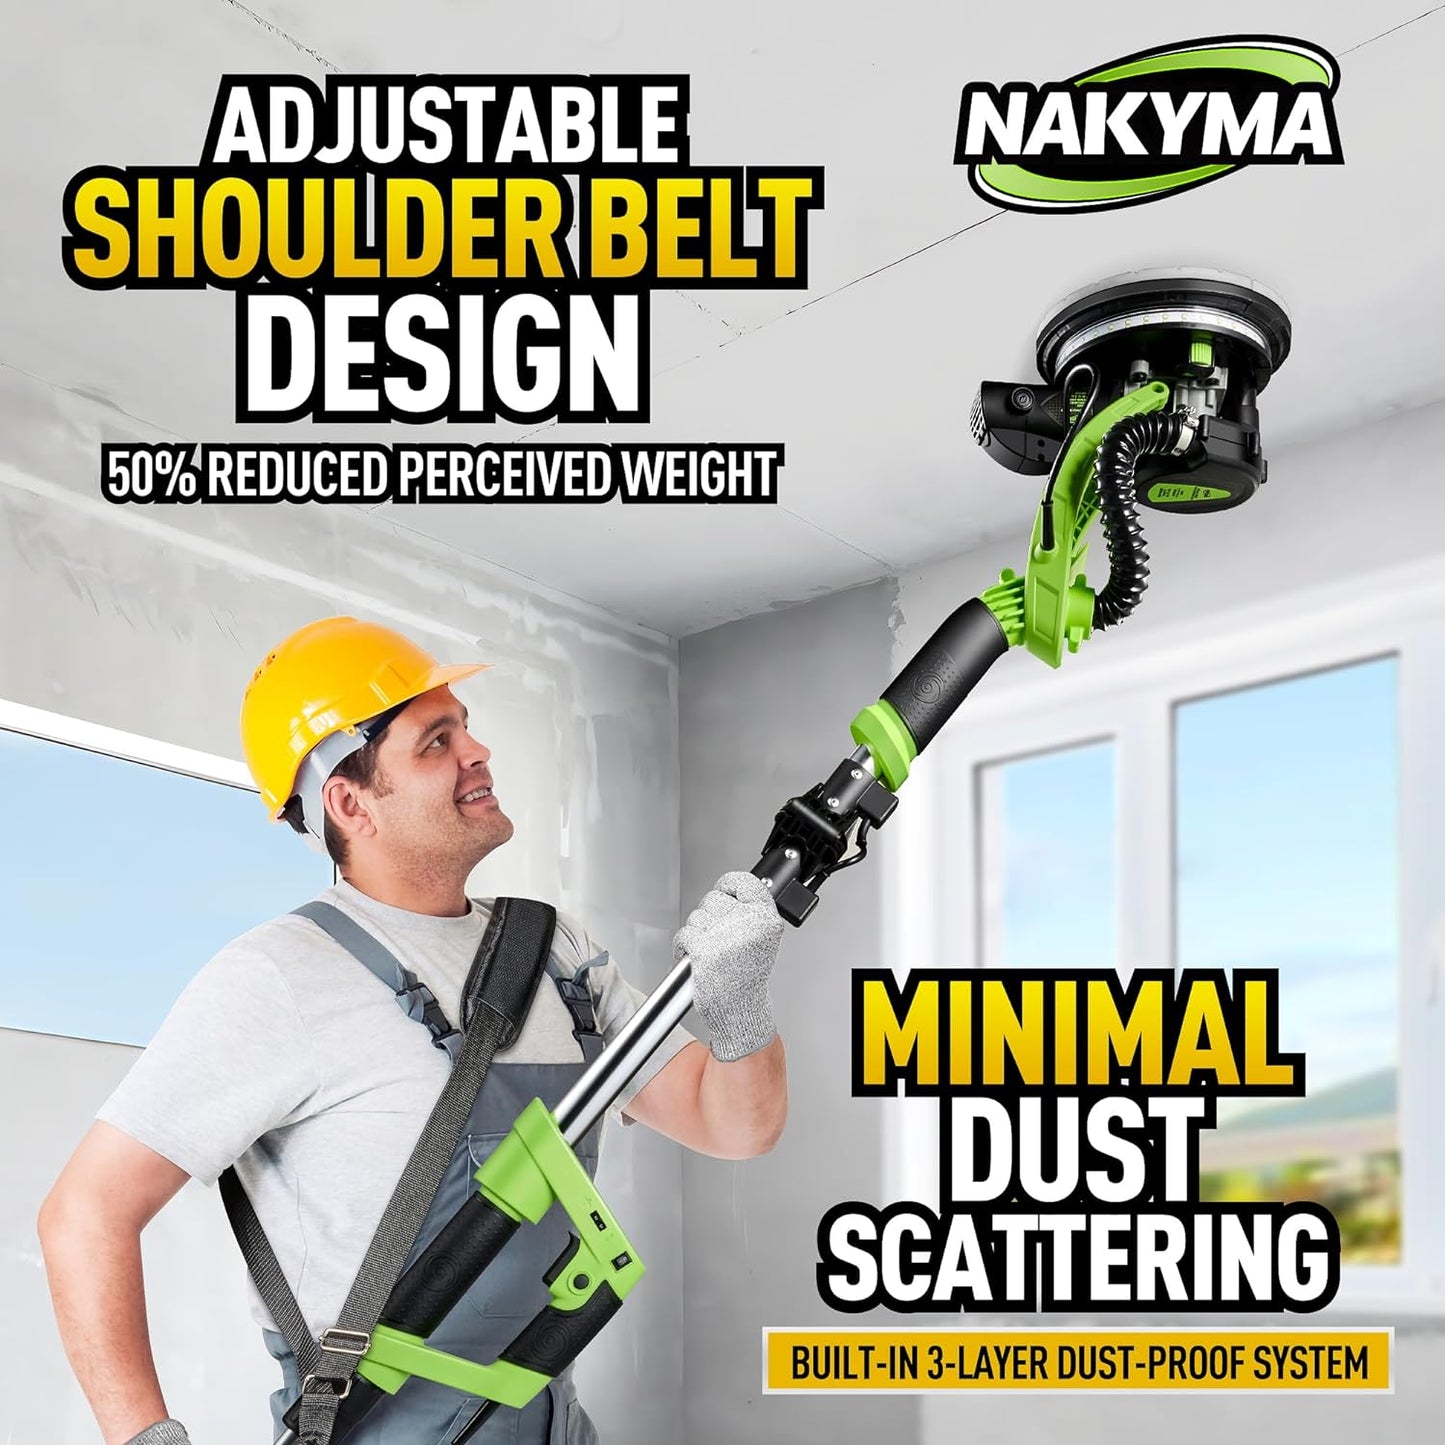 Nakyma Drywall Sander,Electric Drywall Sander With Vacuum Auto Dust Collection,6 Variable Speed 500-1800RPM, Shoulder Belt Design for Weight Reduction, Extendable & Foldable Handle, 12 Sandin